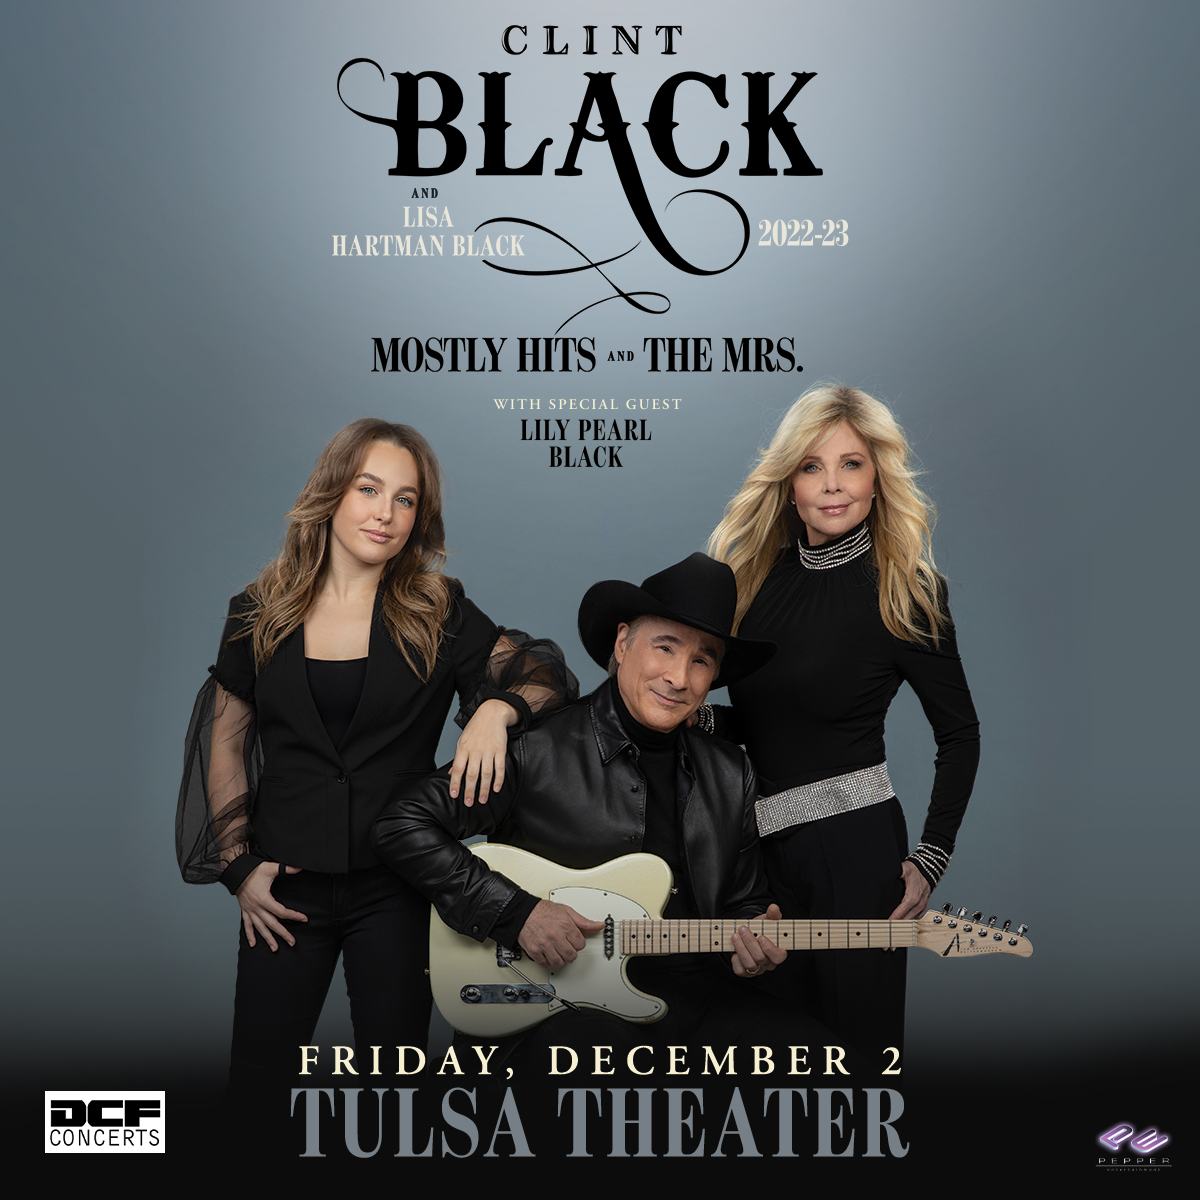 🤠🤠 ANNOUNCEMENT: @Clint_Black feat. @lisahbofficial ~ Mostly Hits and the Mrs. Tour ~ with special guest @lilypblack live at Tulsa Theater on Friday, 12/2! 🔥🔥 bit.ly/ClintBlackTuls…